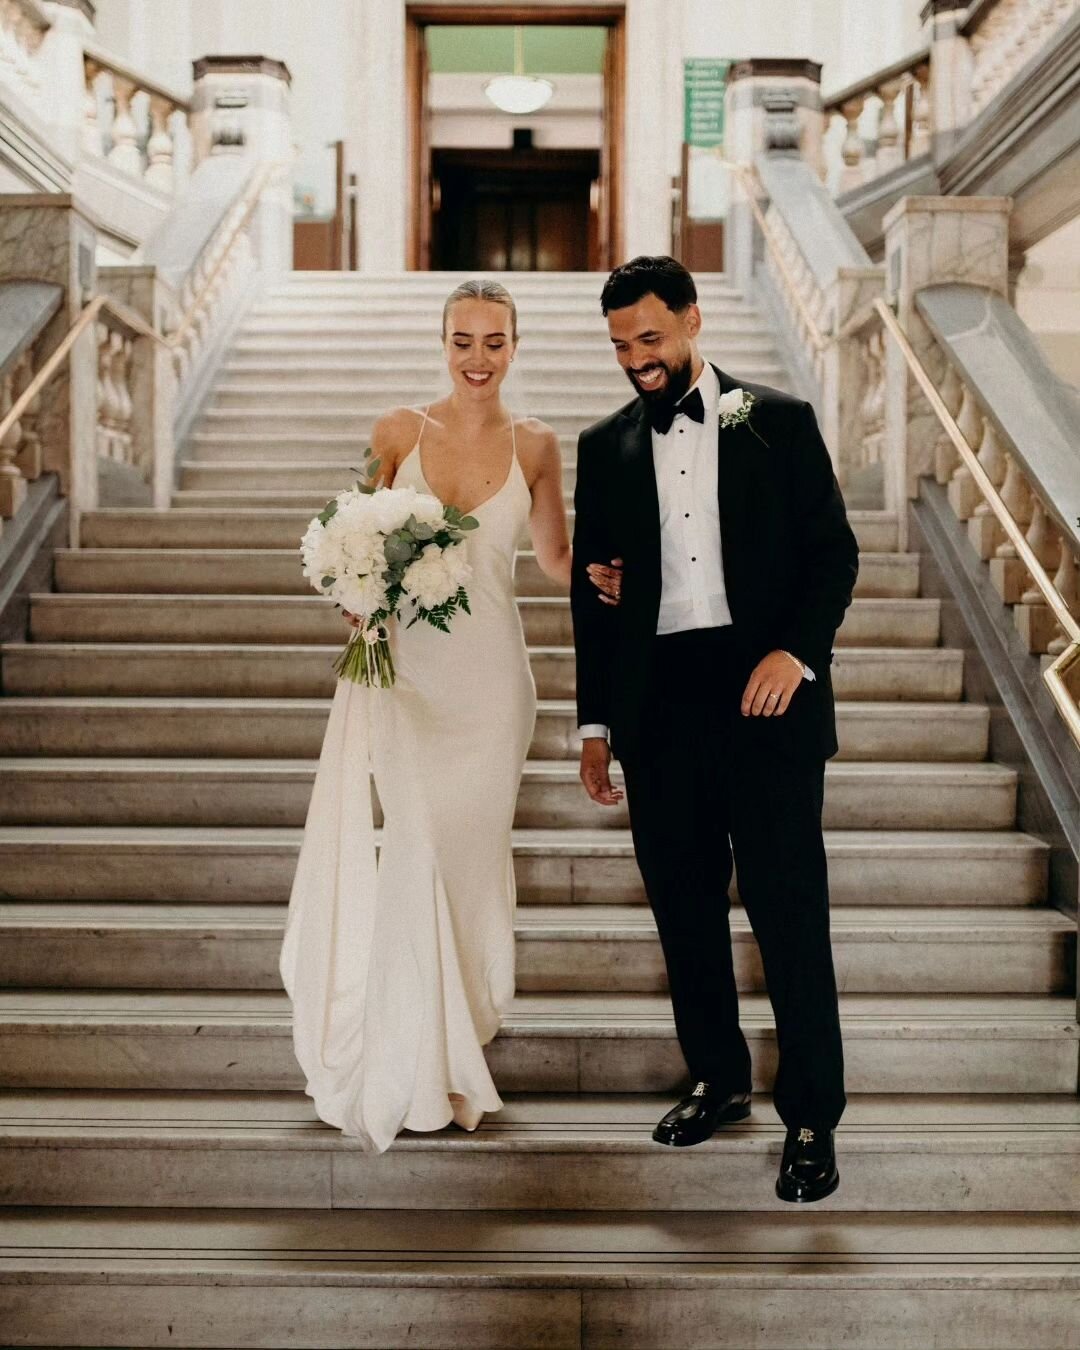 Flashback to this gorgeous London wedding ❤️

From the intimate ceremony at Islington Town Hall to  the trendy reception at Bistrotheque- the ultimate city wedding celebration! 

#islingtontownhallwedding #bistrothequewedding #bridalinspiration #mode